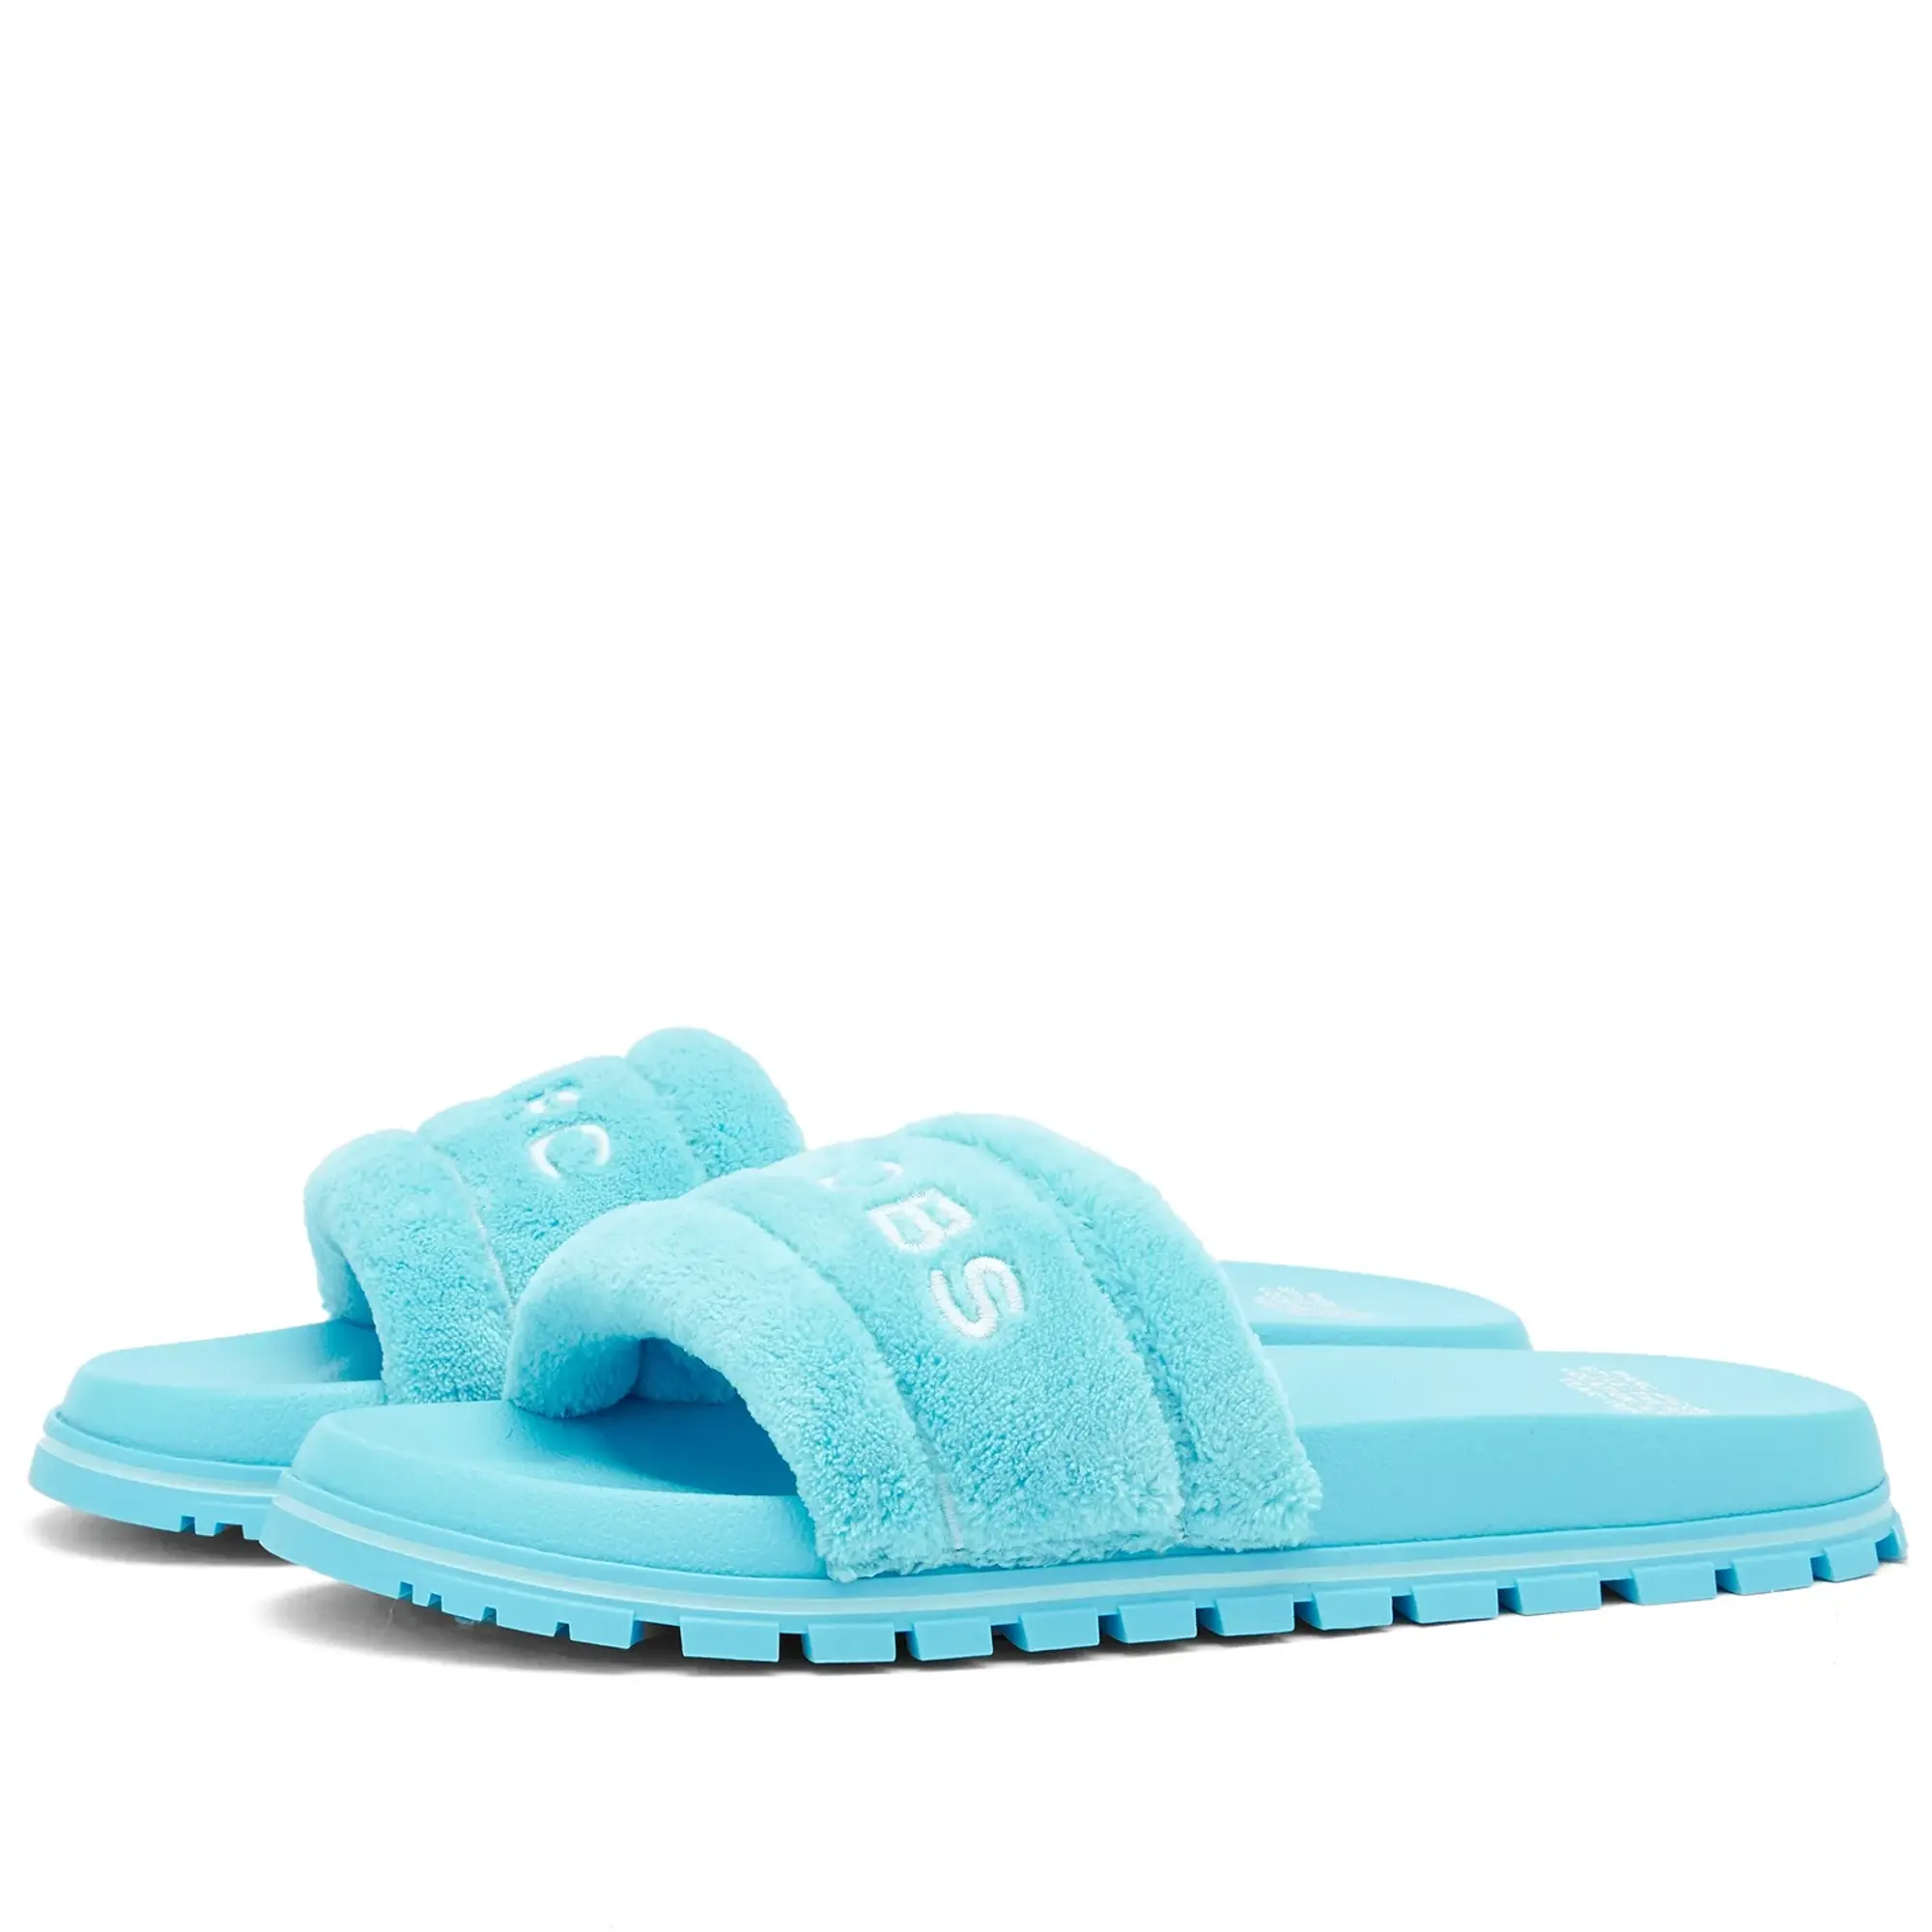 Marc Jacobs Women's The Terry Slide Pool